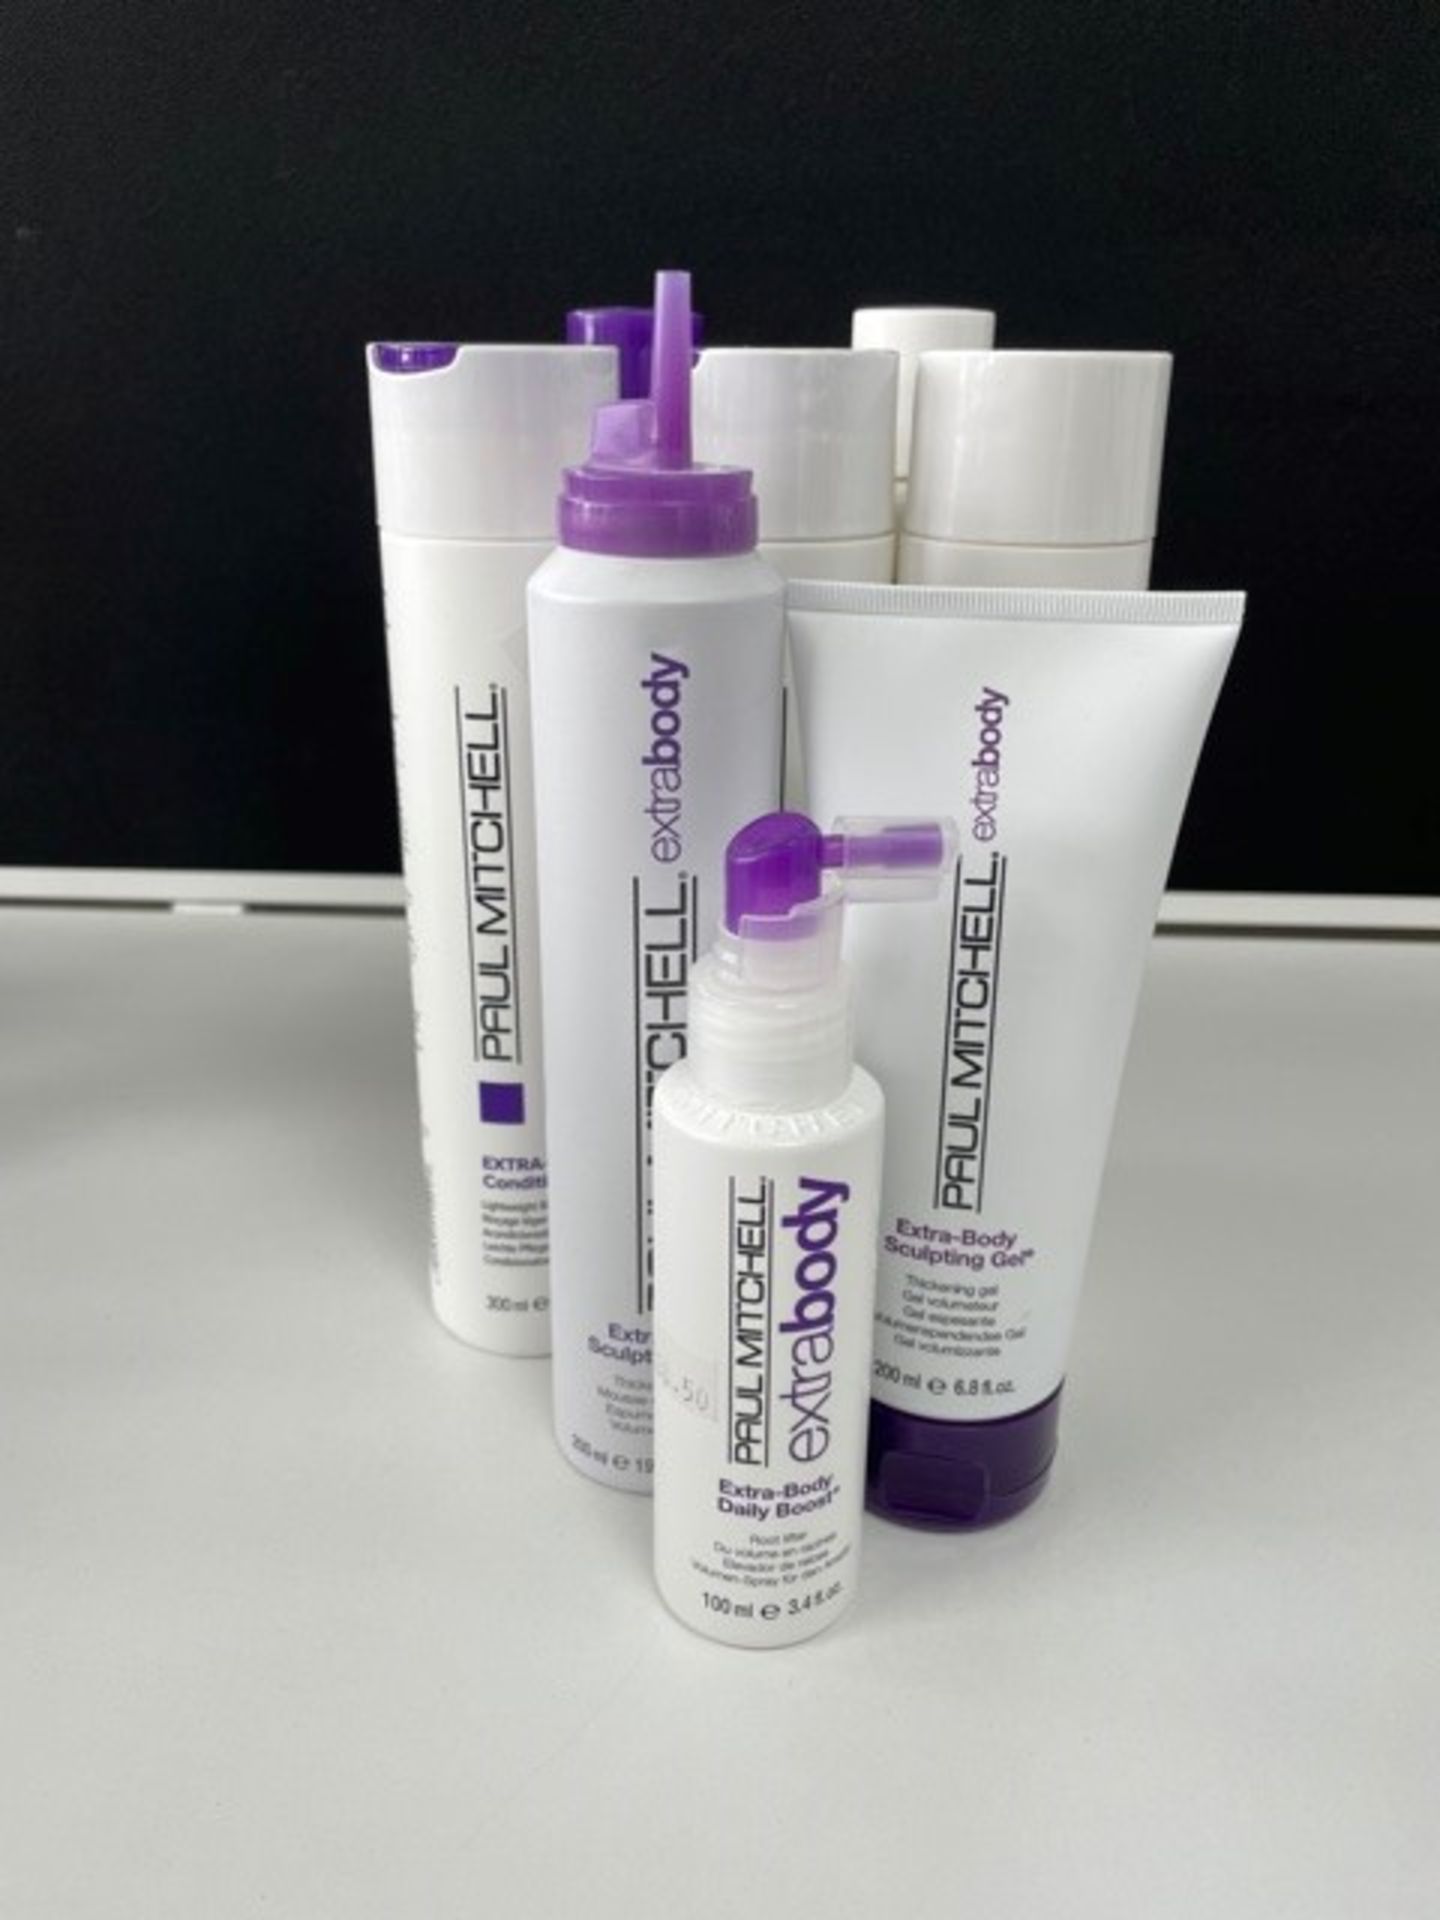 8 x Paul Mitchell Hair Care Products | See description | Total RRP £61